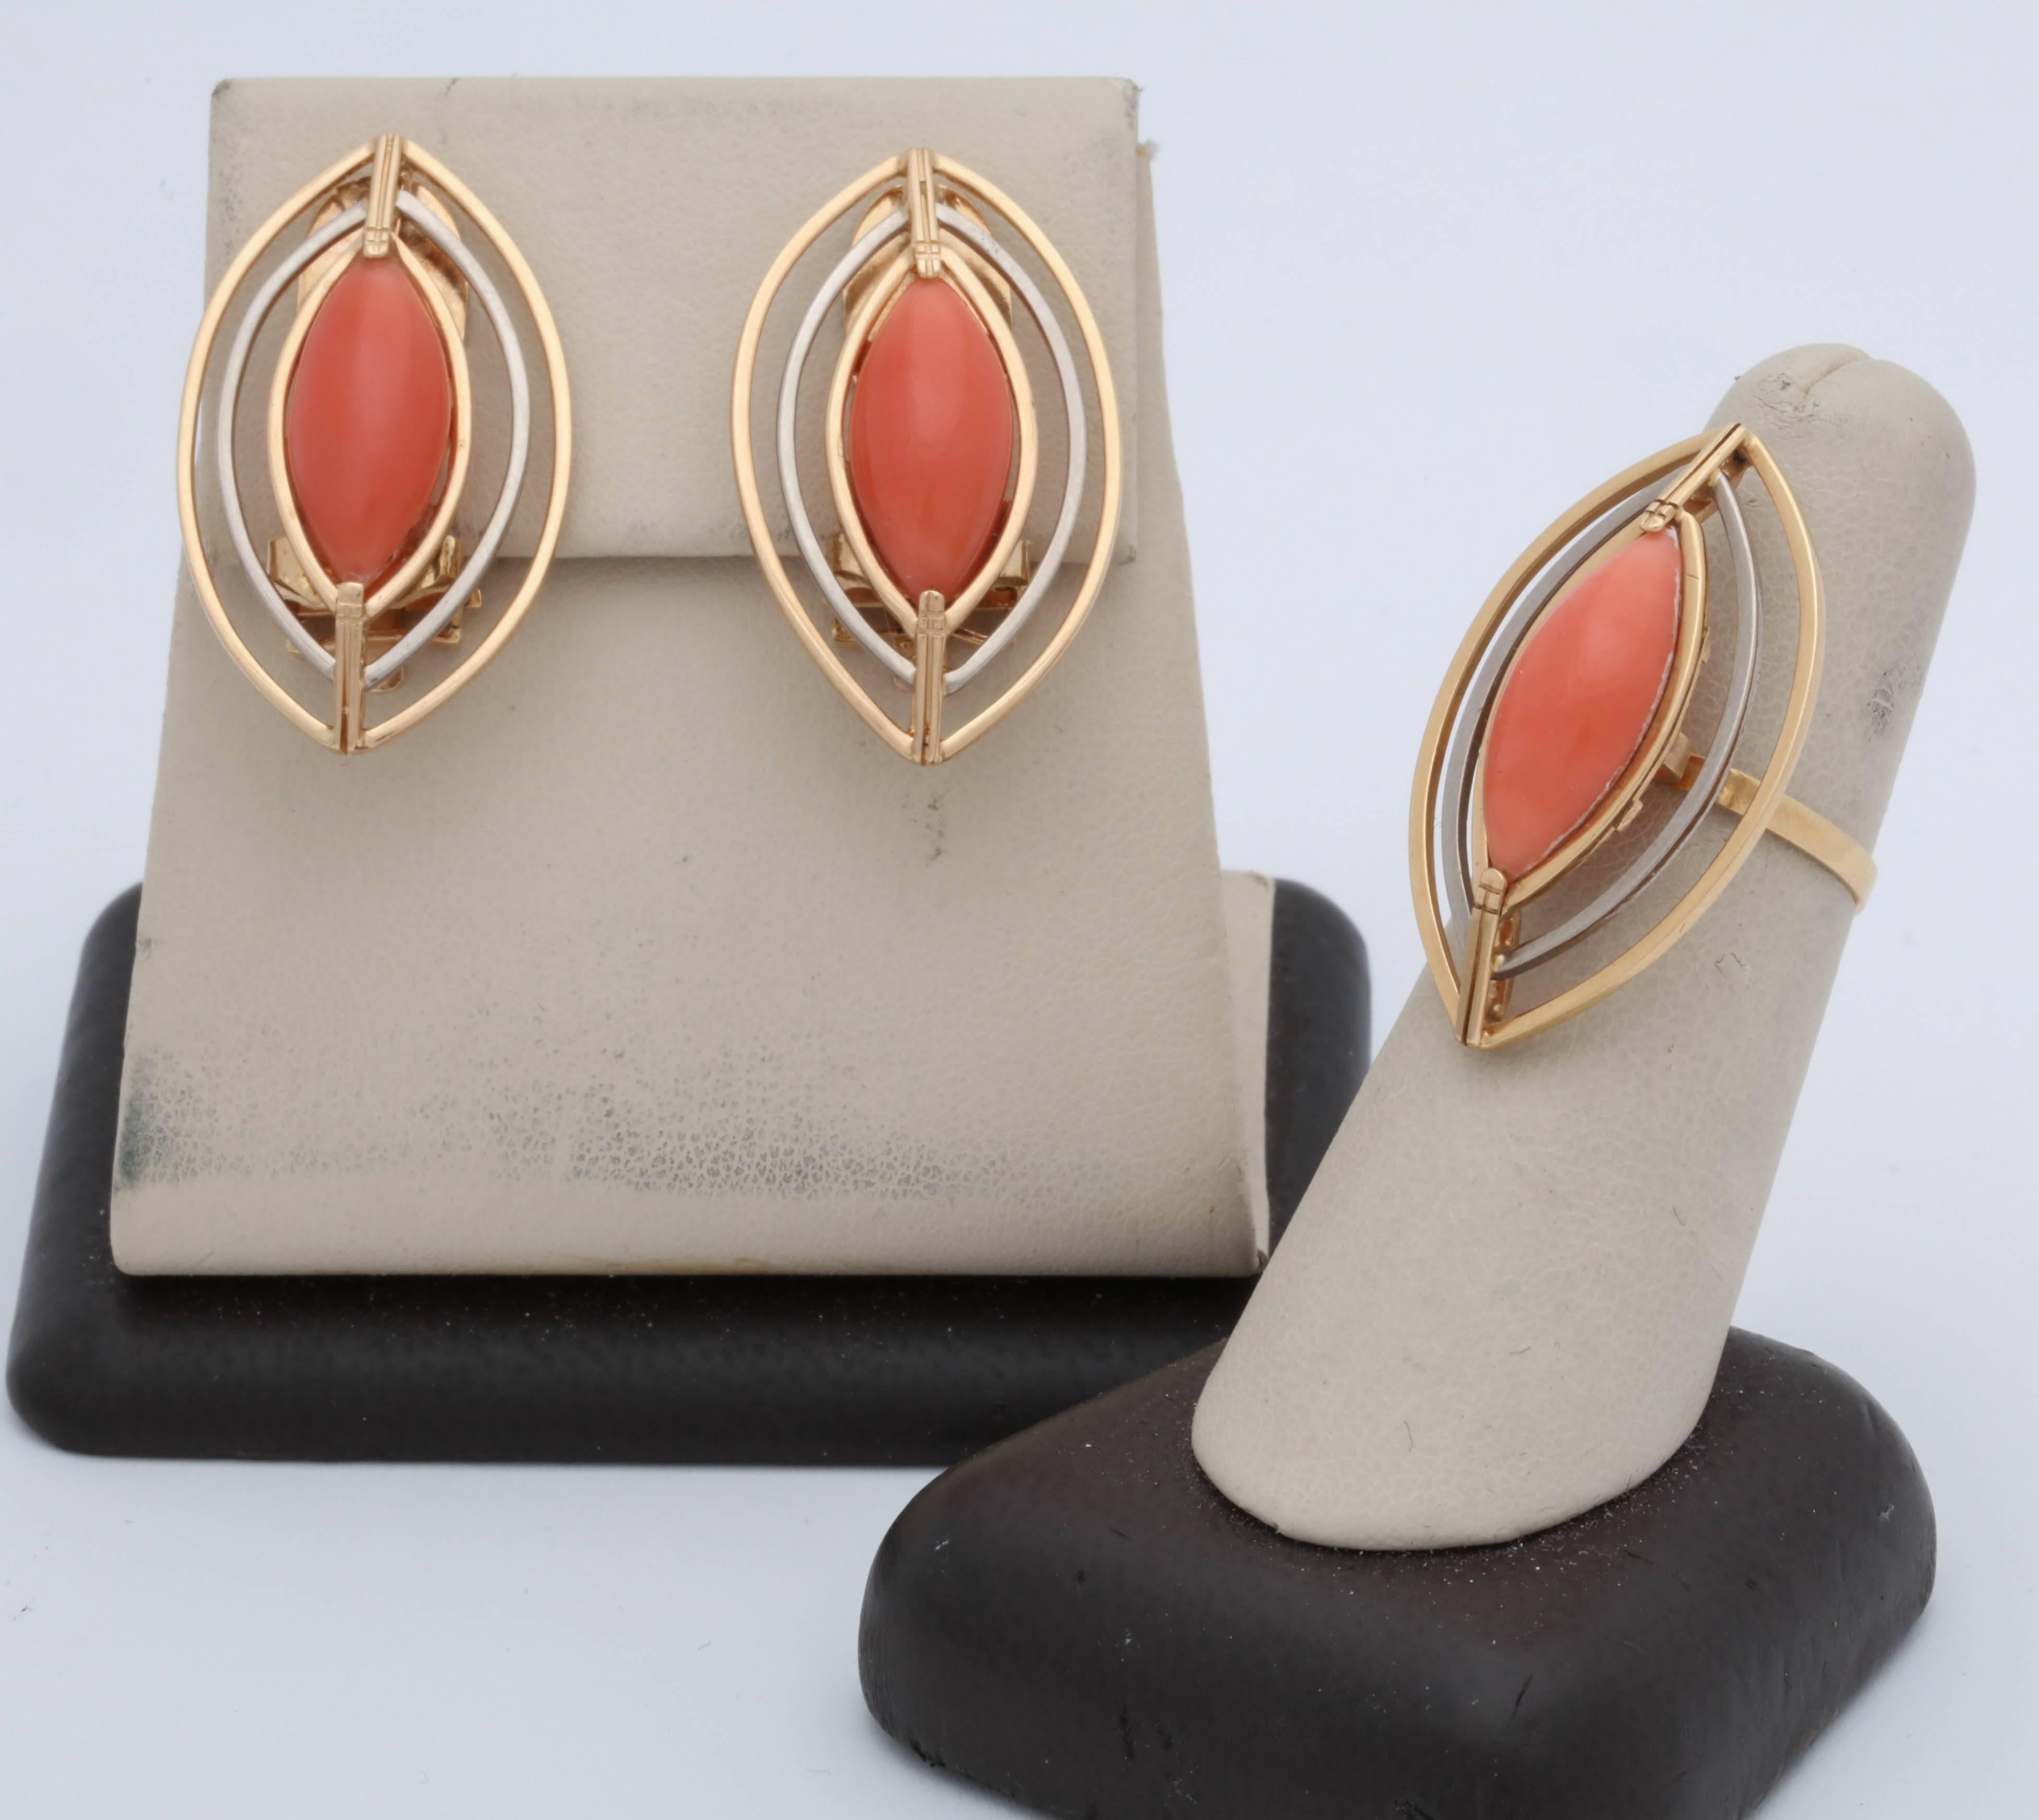 One Ladies Ensemble Include In Suite Is A Ring Centering A 13Mm Marquis Cut Pastel Color Coral Stone With A Beautiful HandMade WireWork Setting Composed Of 18kt White And Yellow Gold Open WireWork Setting.Included In Suite Are A Pair Of Earrings